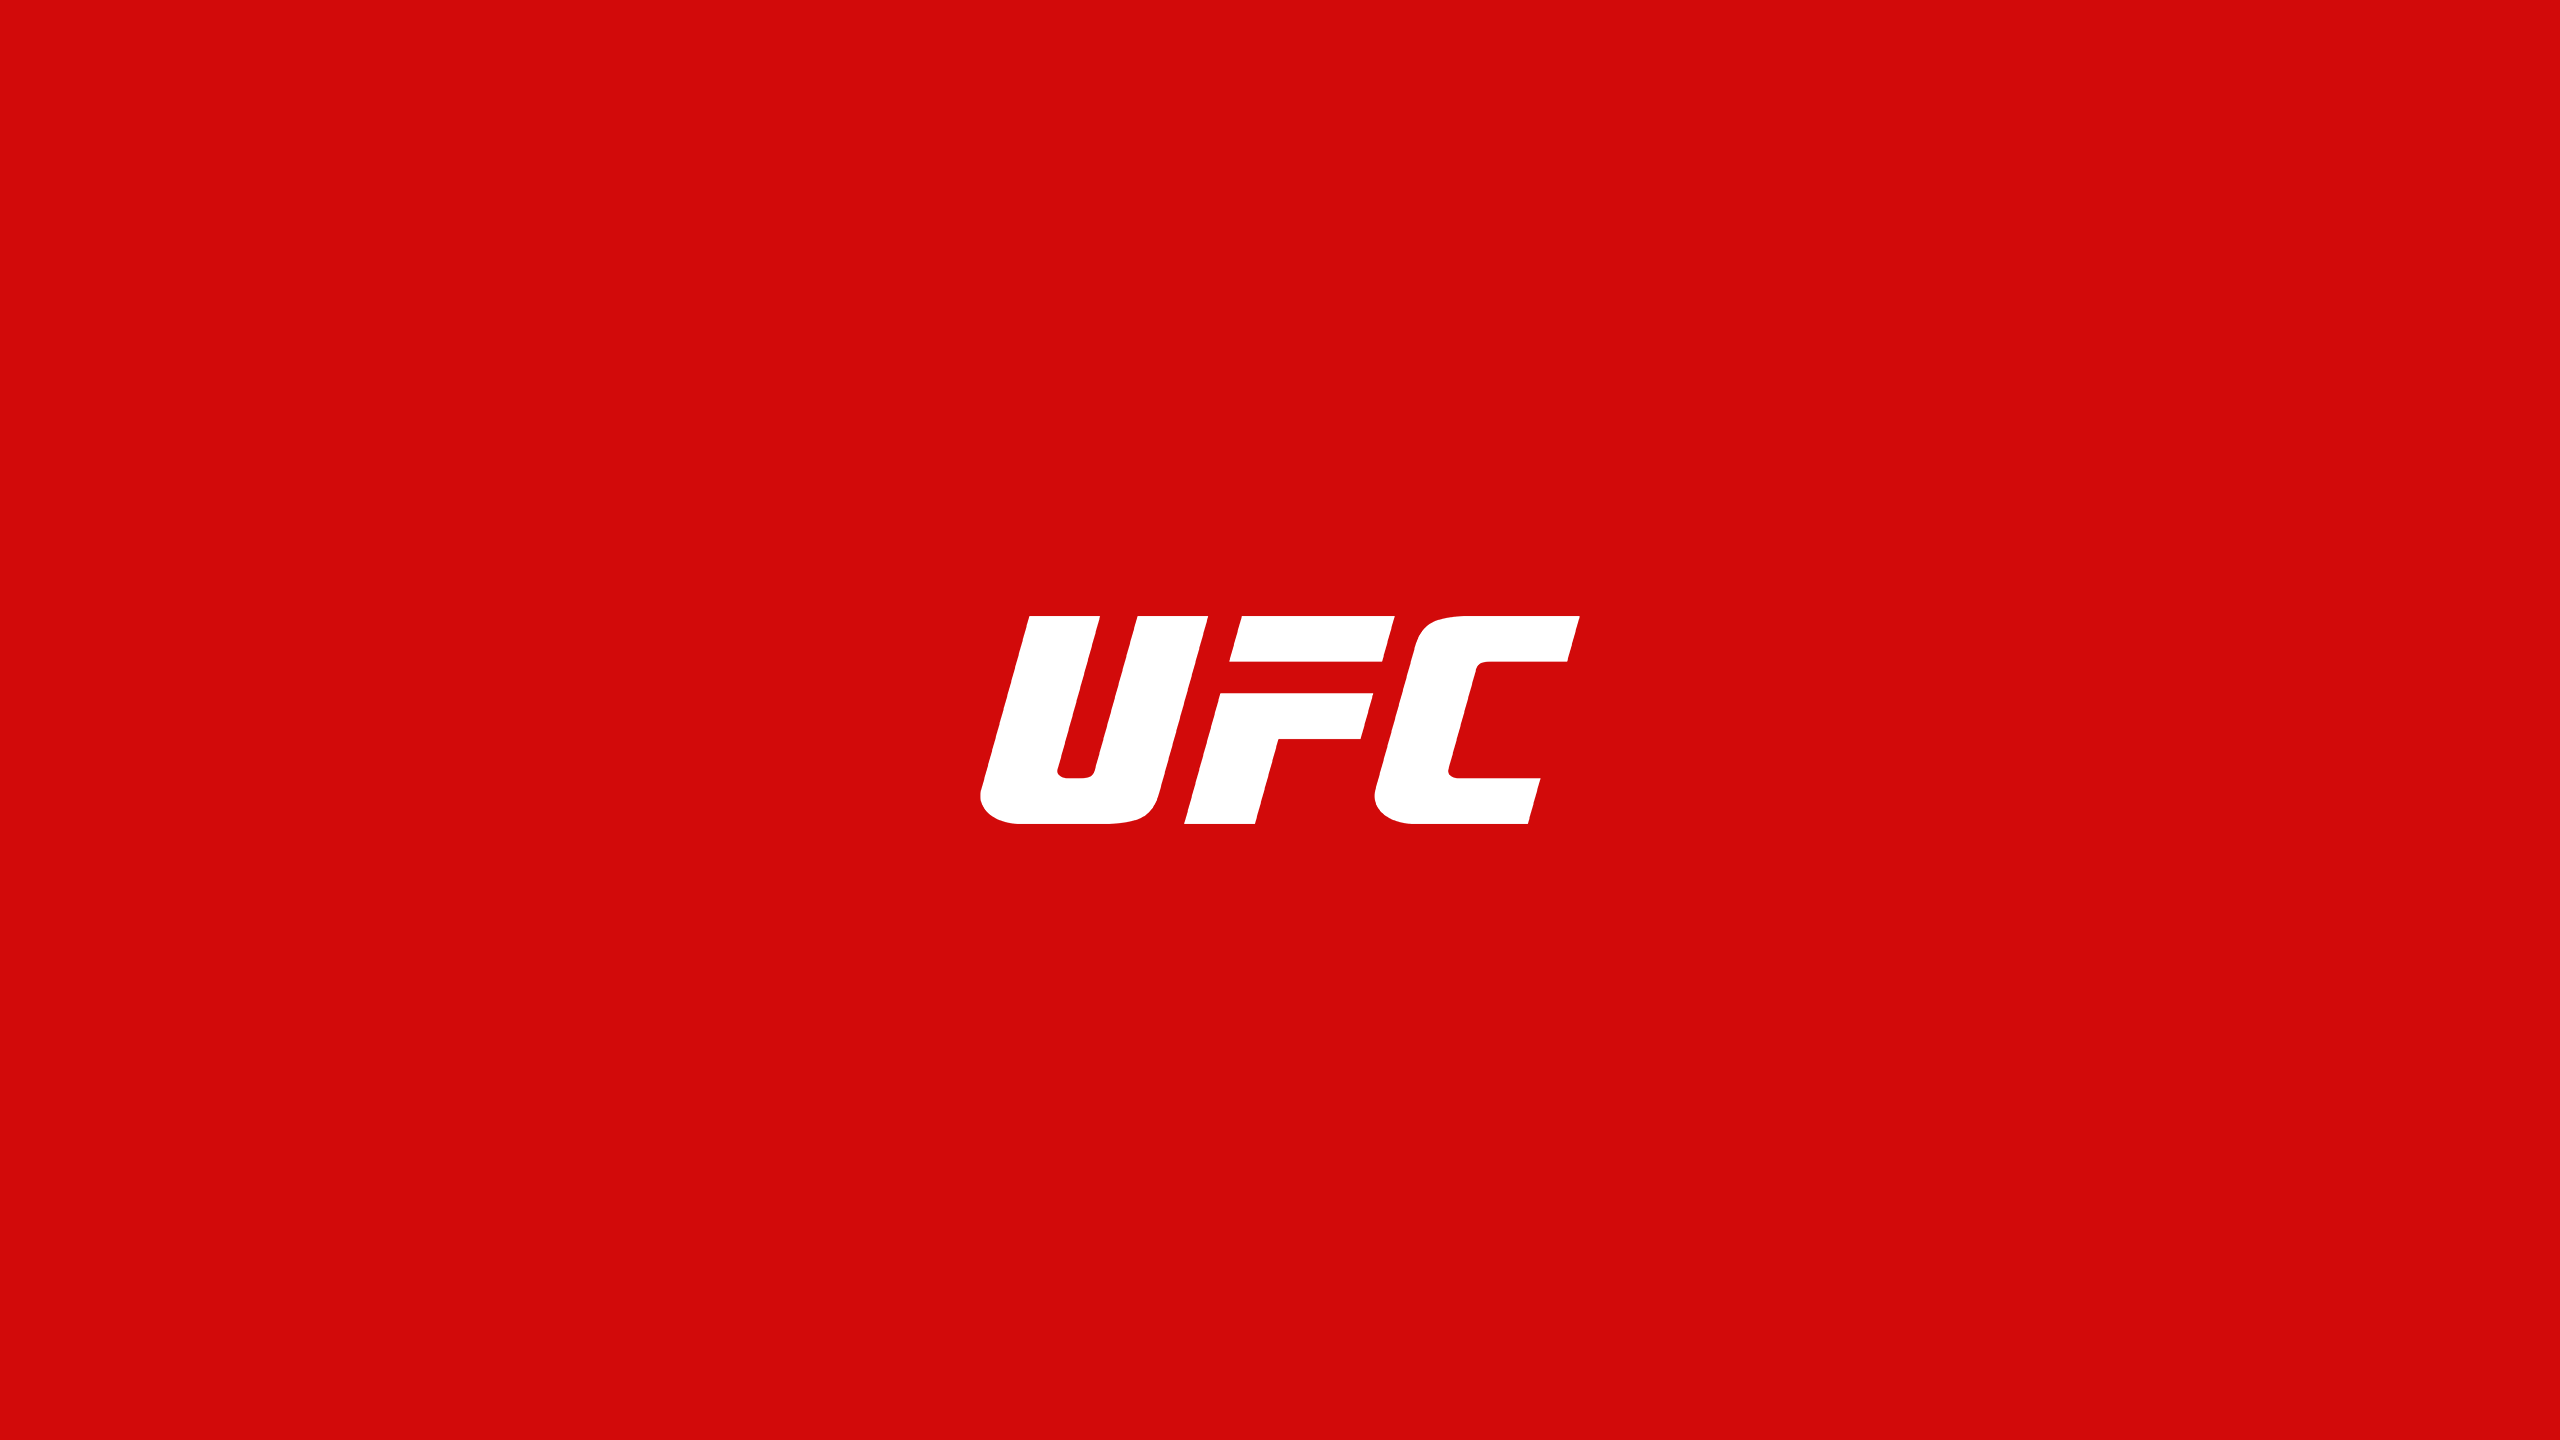 Ultimate Fighter Championship - UFC - Fighting - Square Bettor